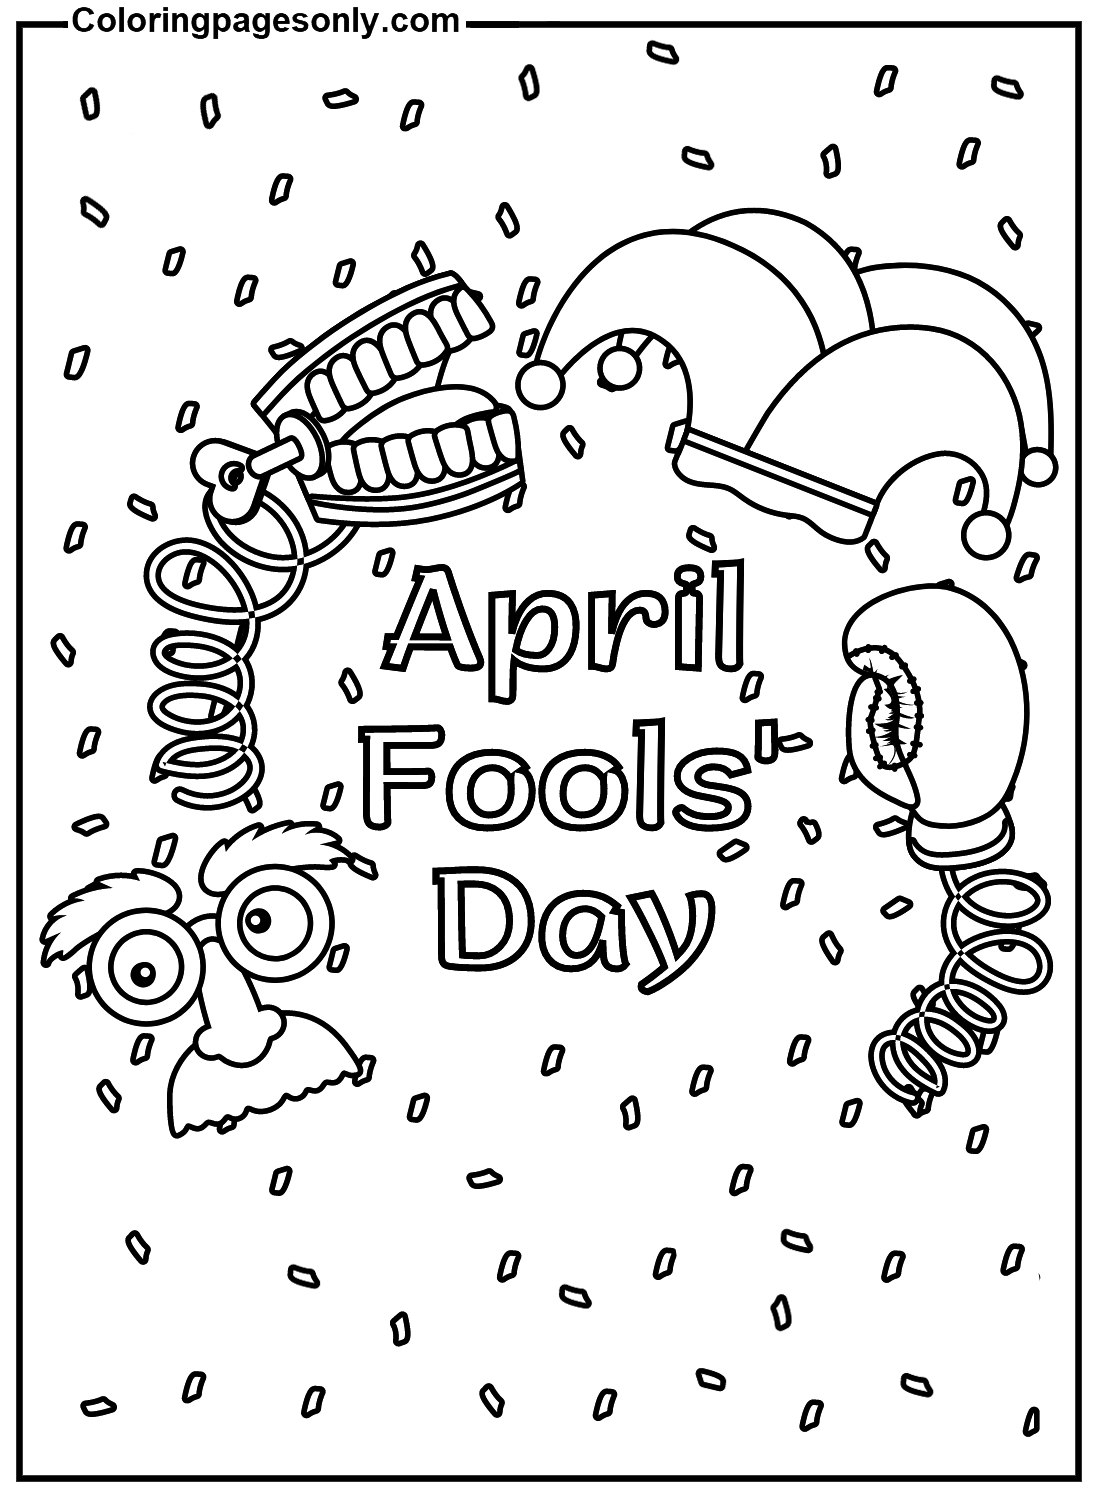 Pictures April Fools' Day Coloring Pages